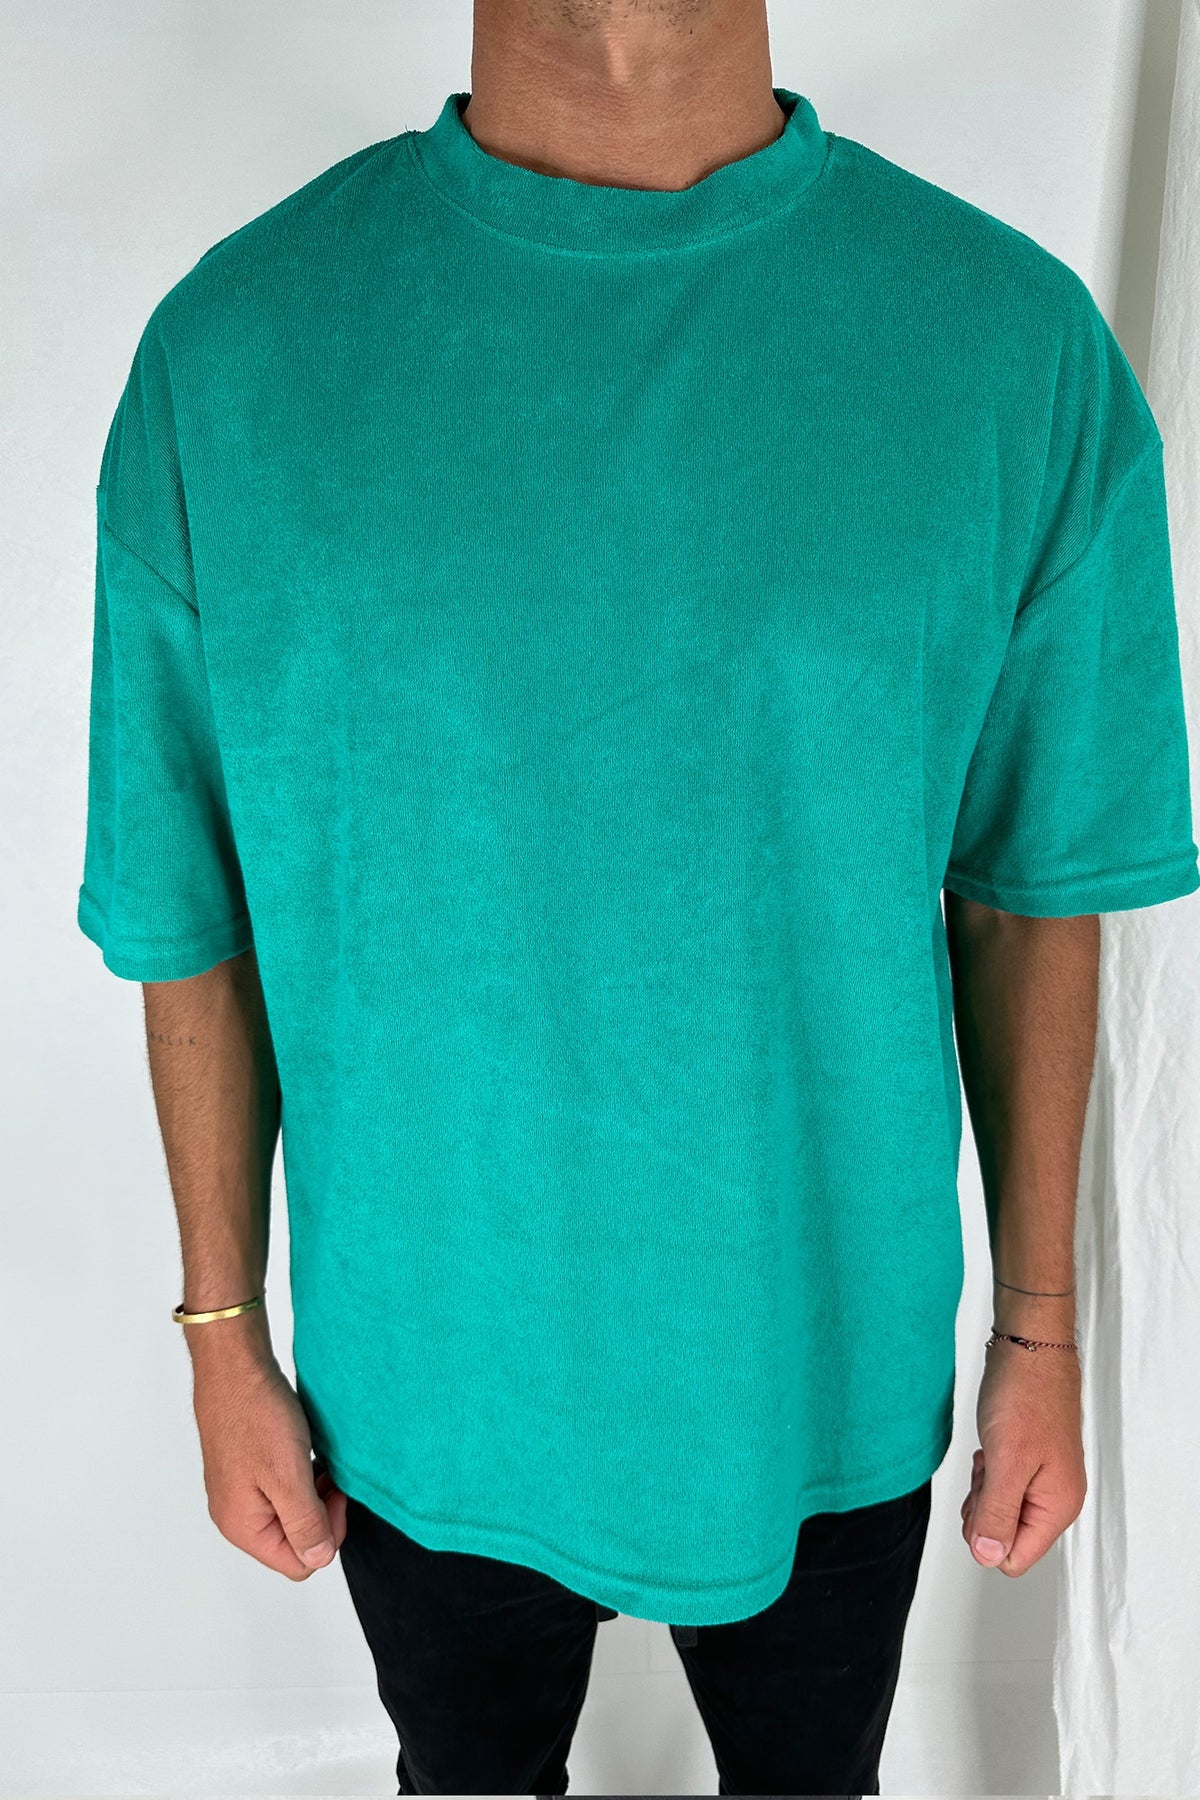 Terry Towelling Tee Green - SALE